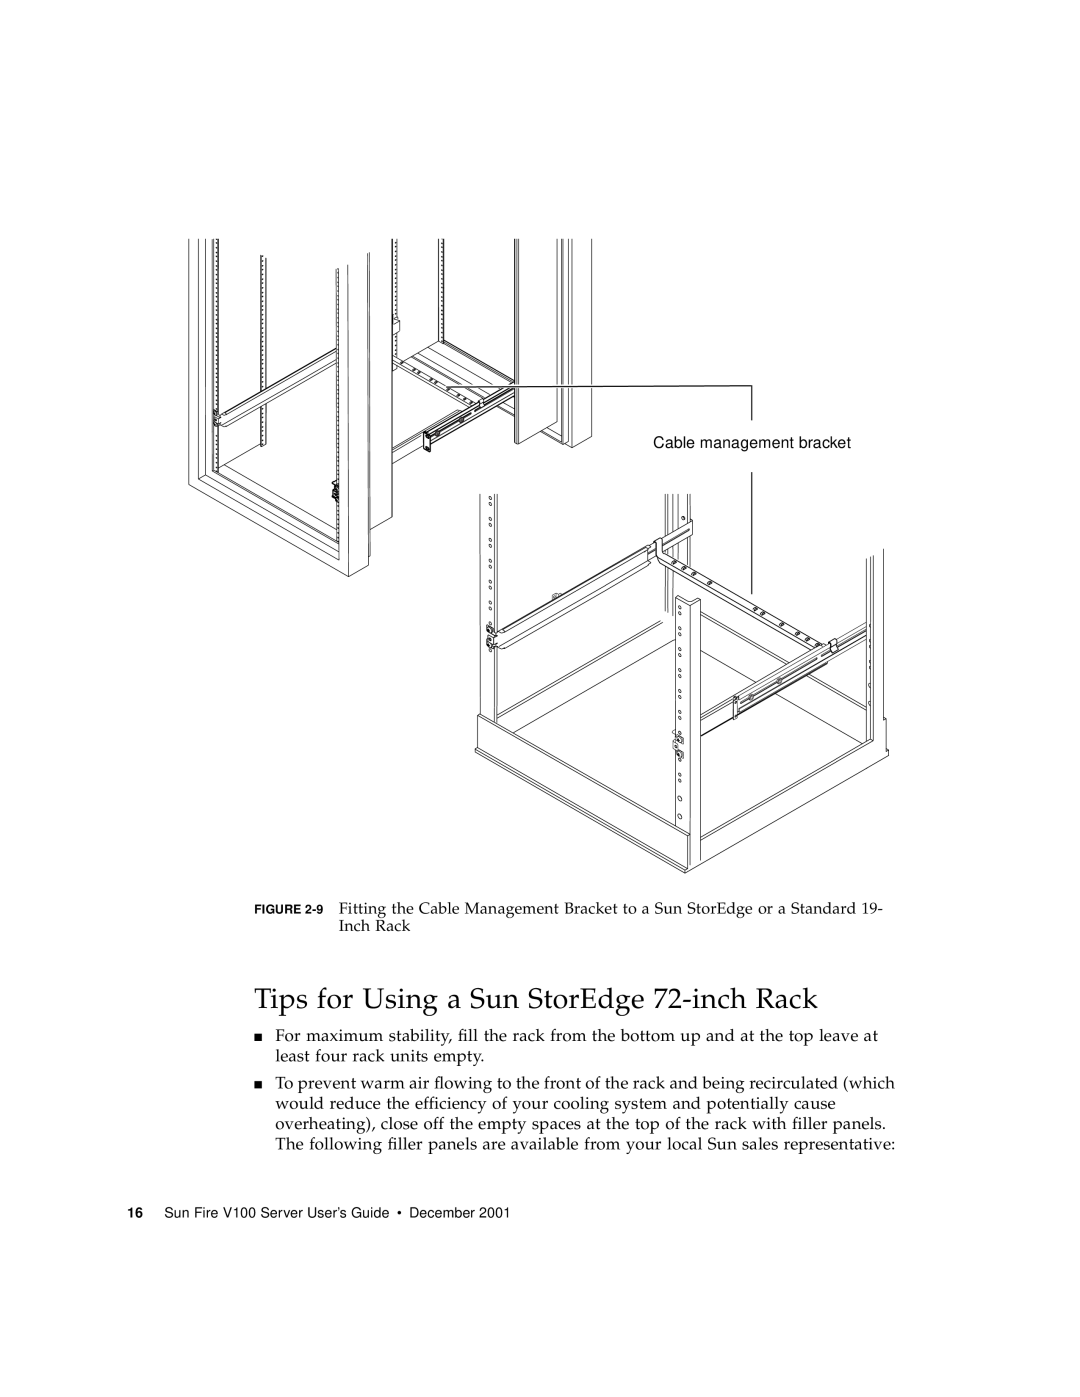 Sun Microsystems Sun Fire V100 manual Tips for Using a Sun StorEdge 72-inch Rack, Cable management bracket 